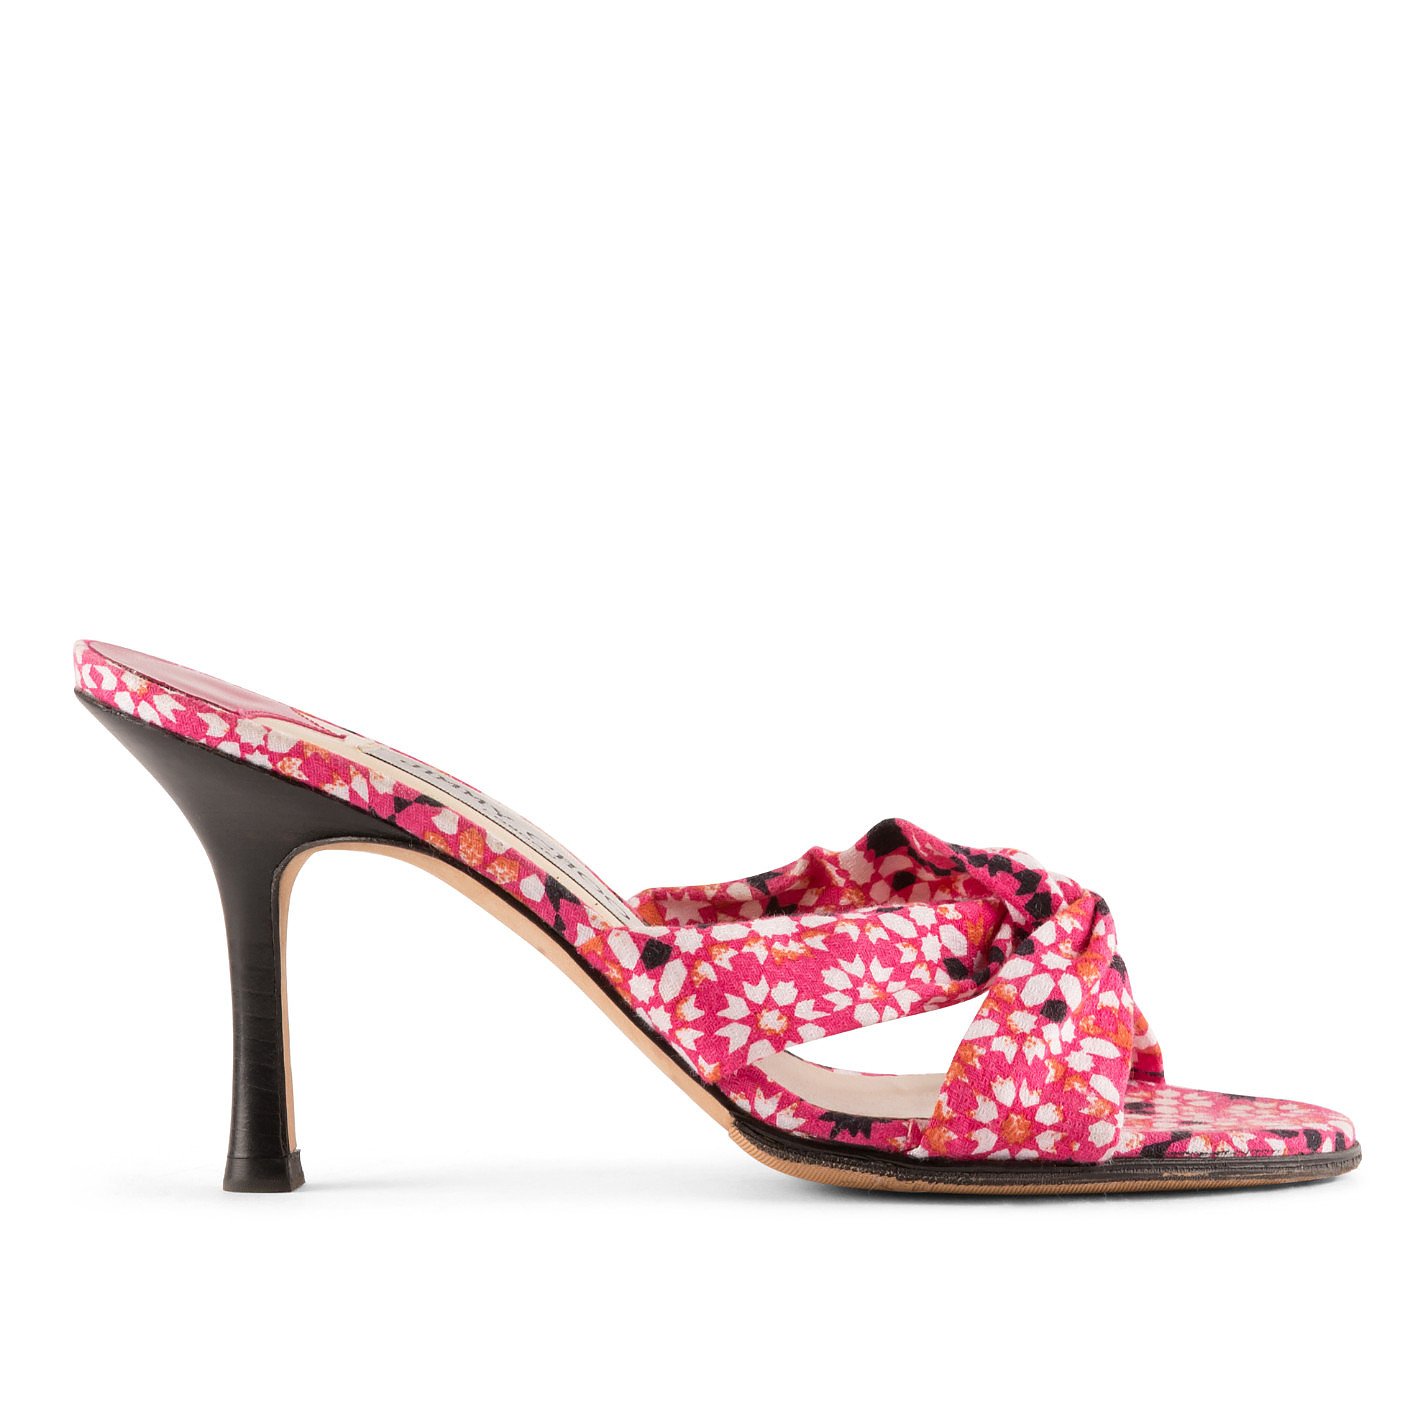 Jimmy Choo Patterned Canvas Heeled Sandals